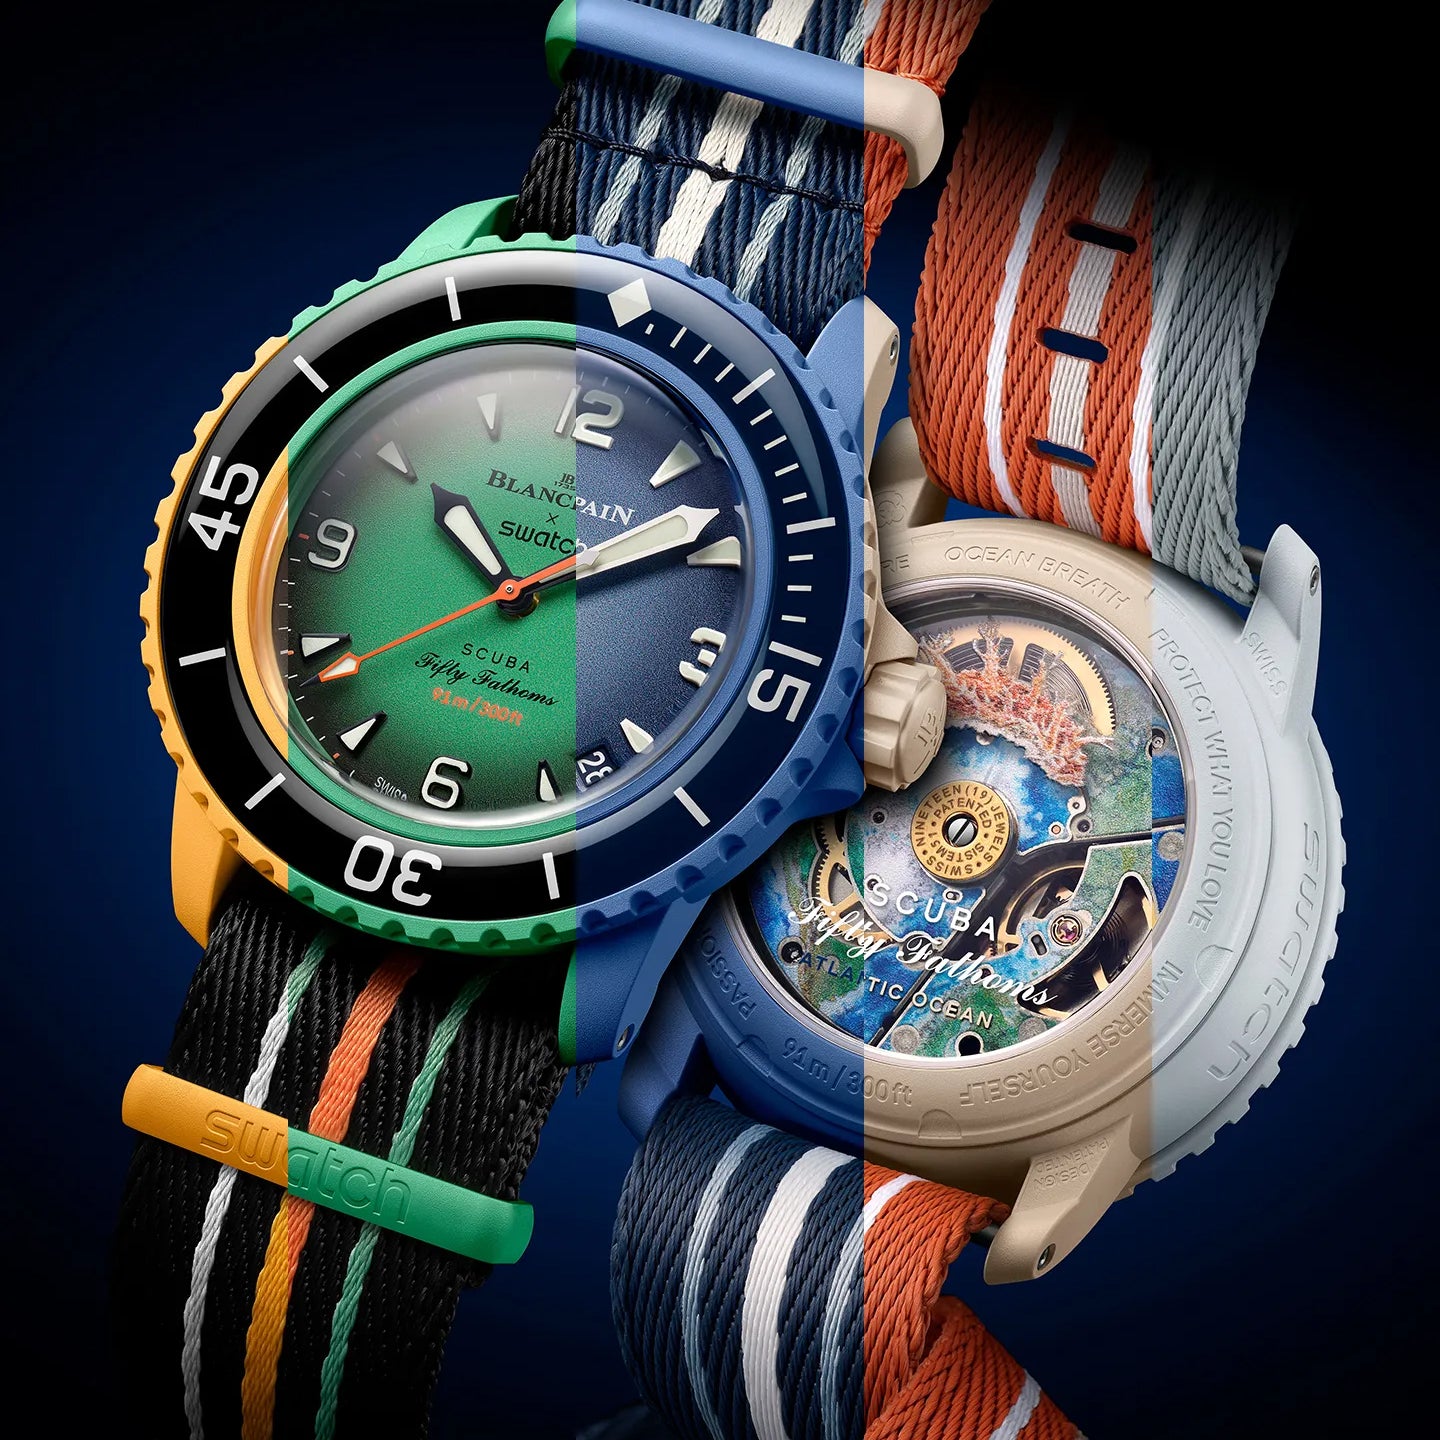 Blancpain and Swatch Dive Together: Presenting the Scuba Fifty Fathoms at Just $400!